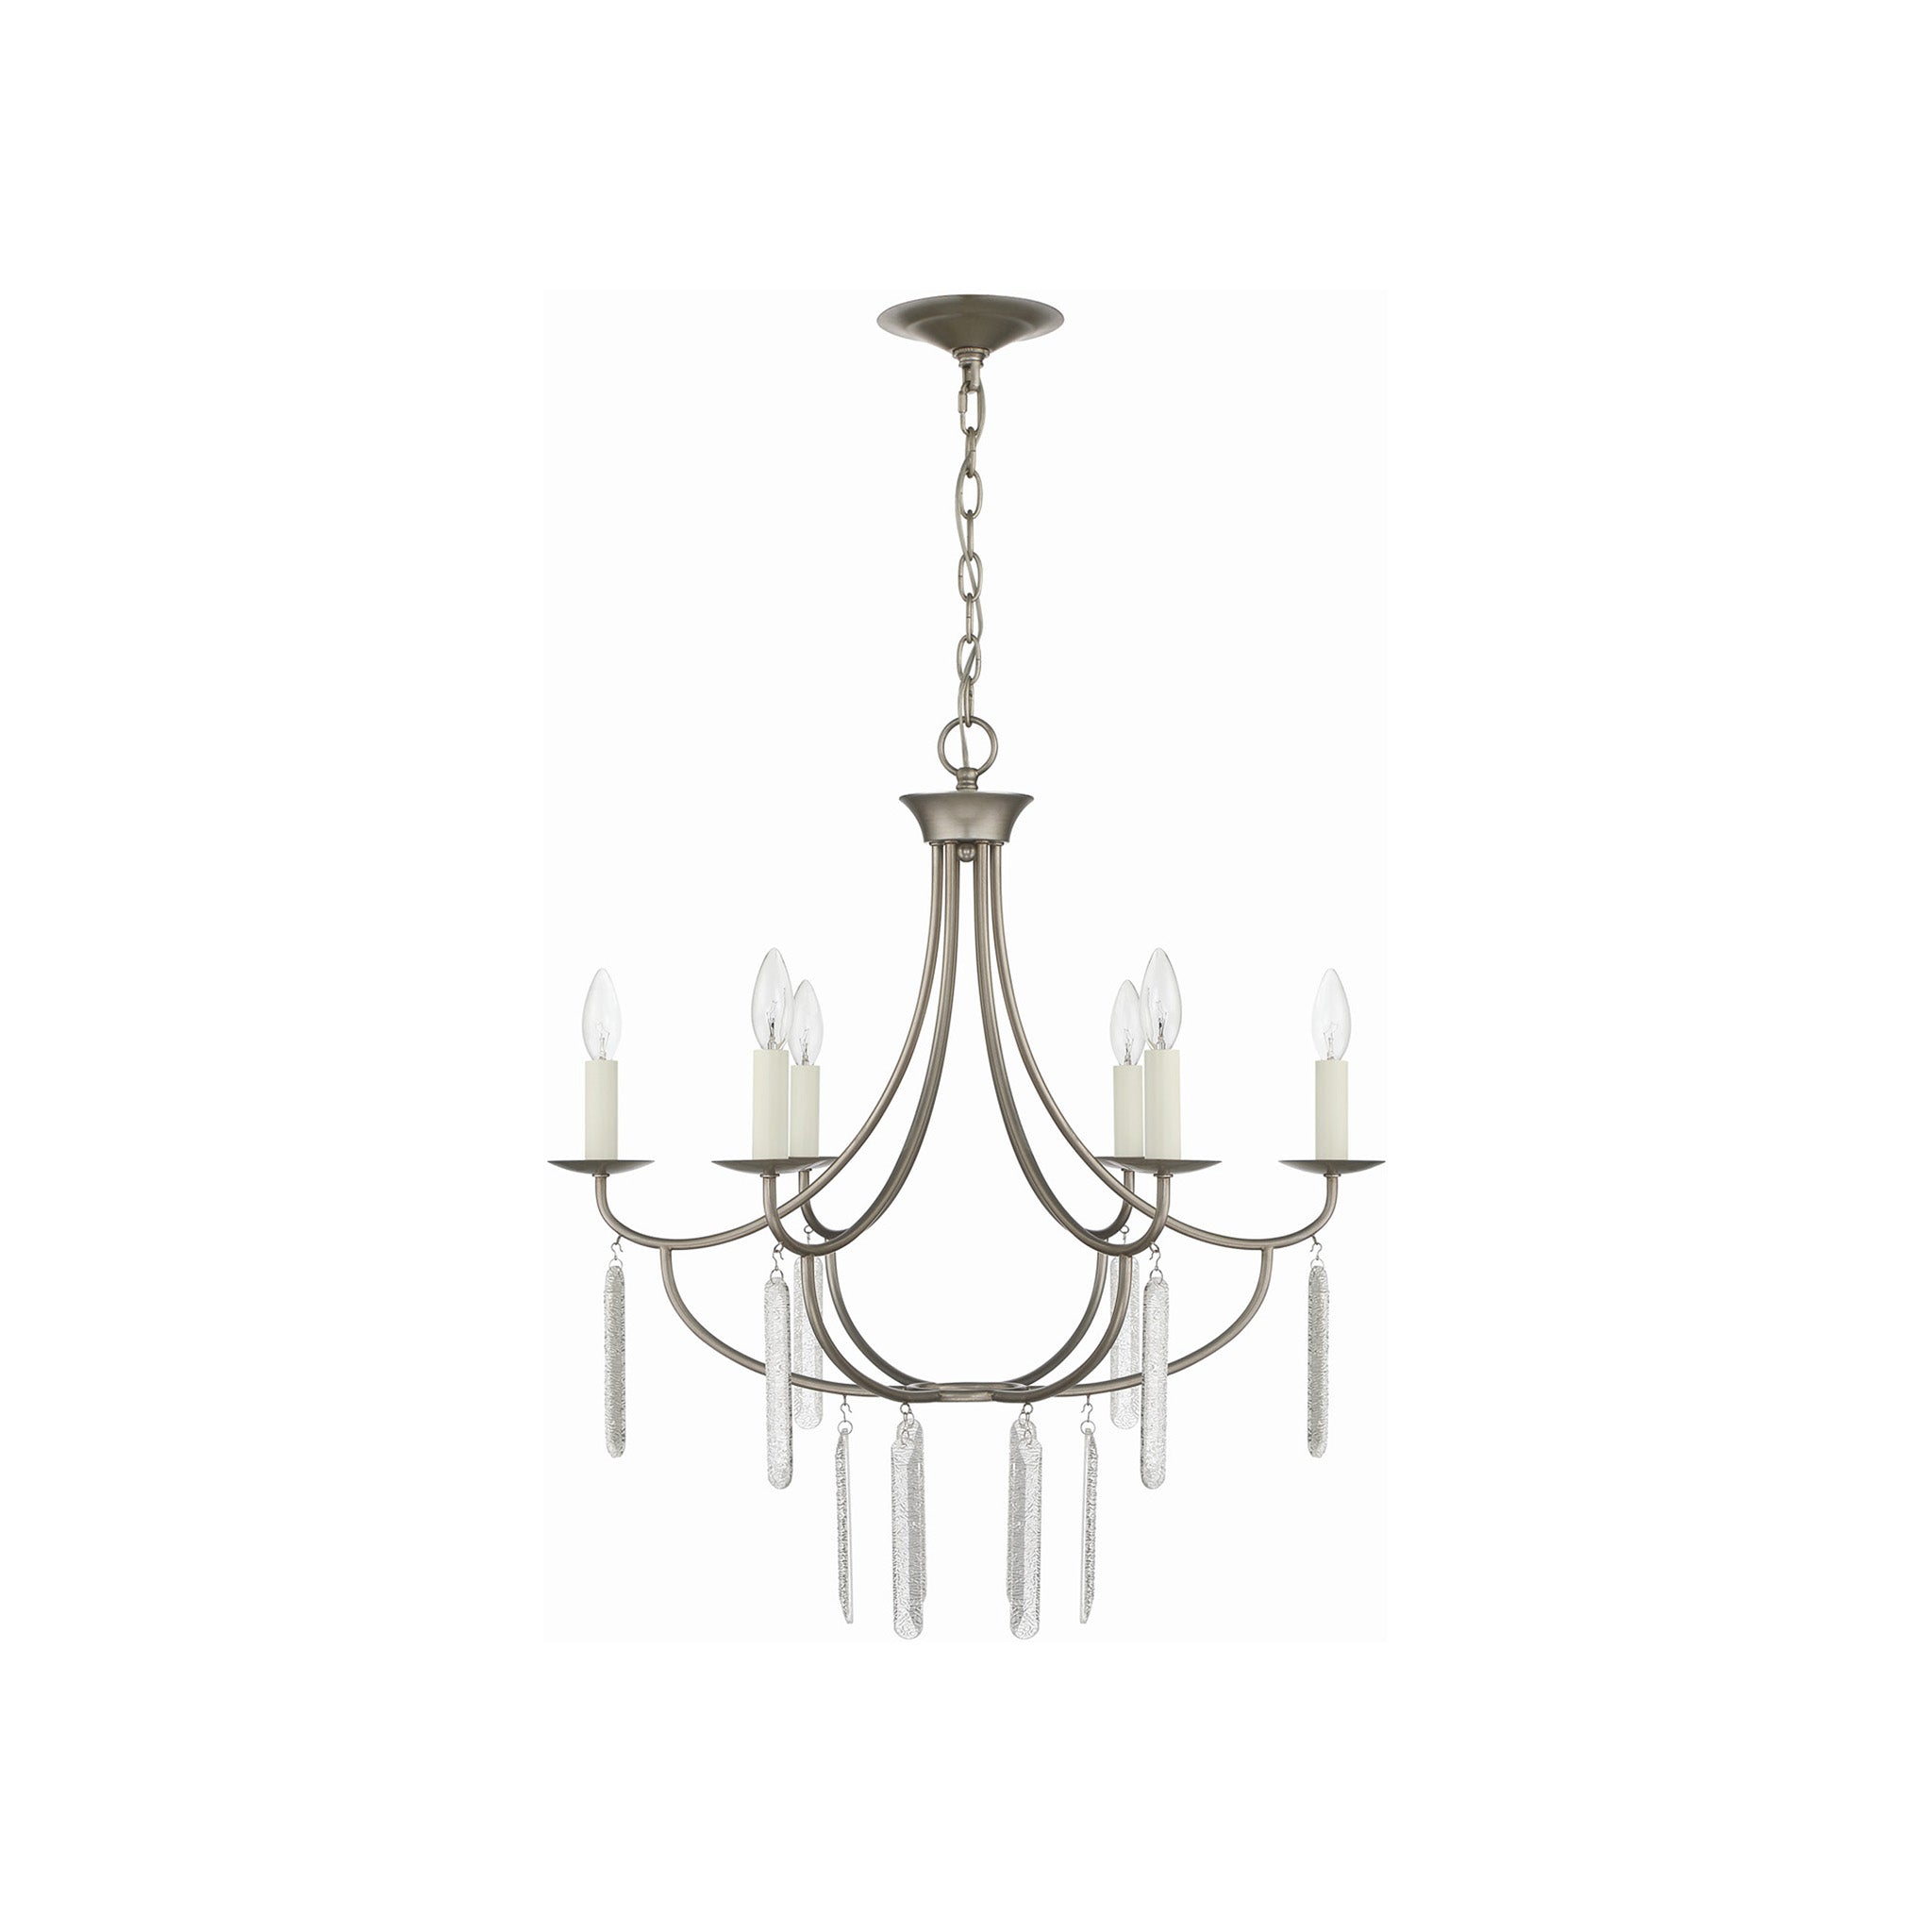 Shadrack 6-Light Classic Candle Chandelier